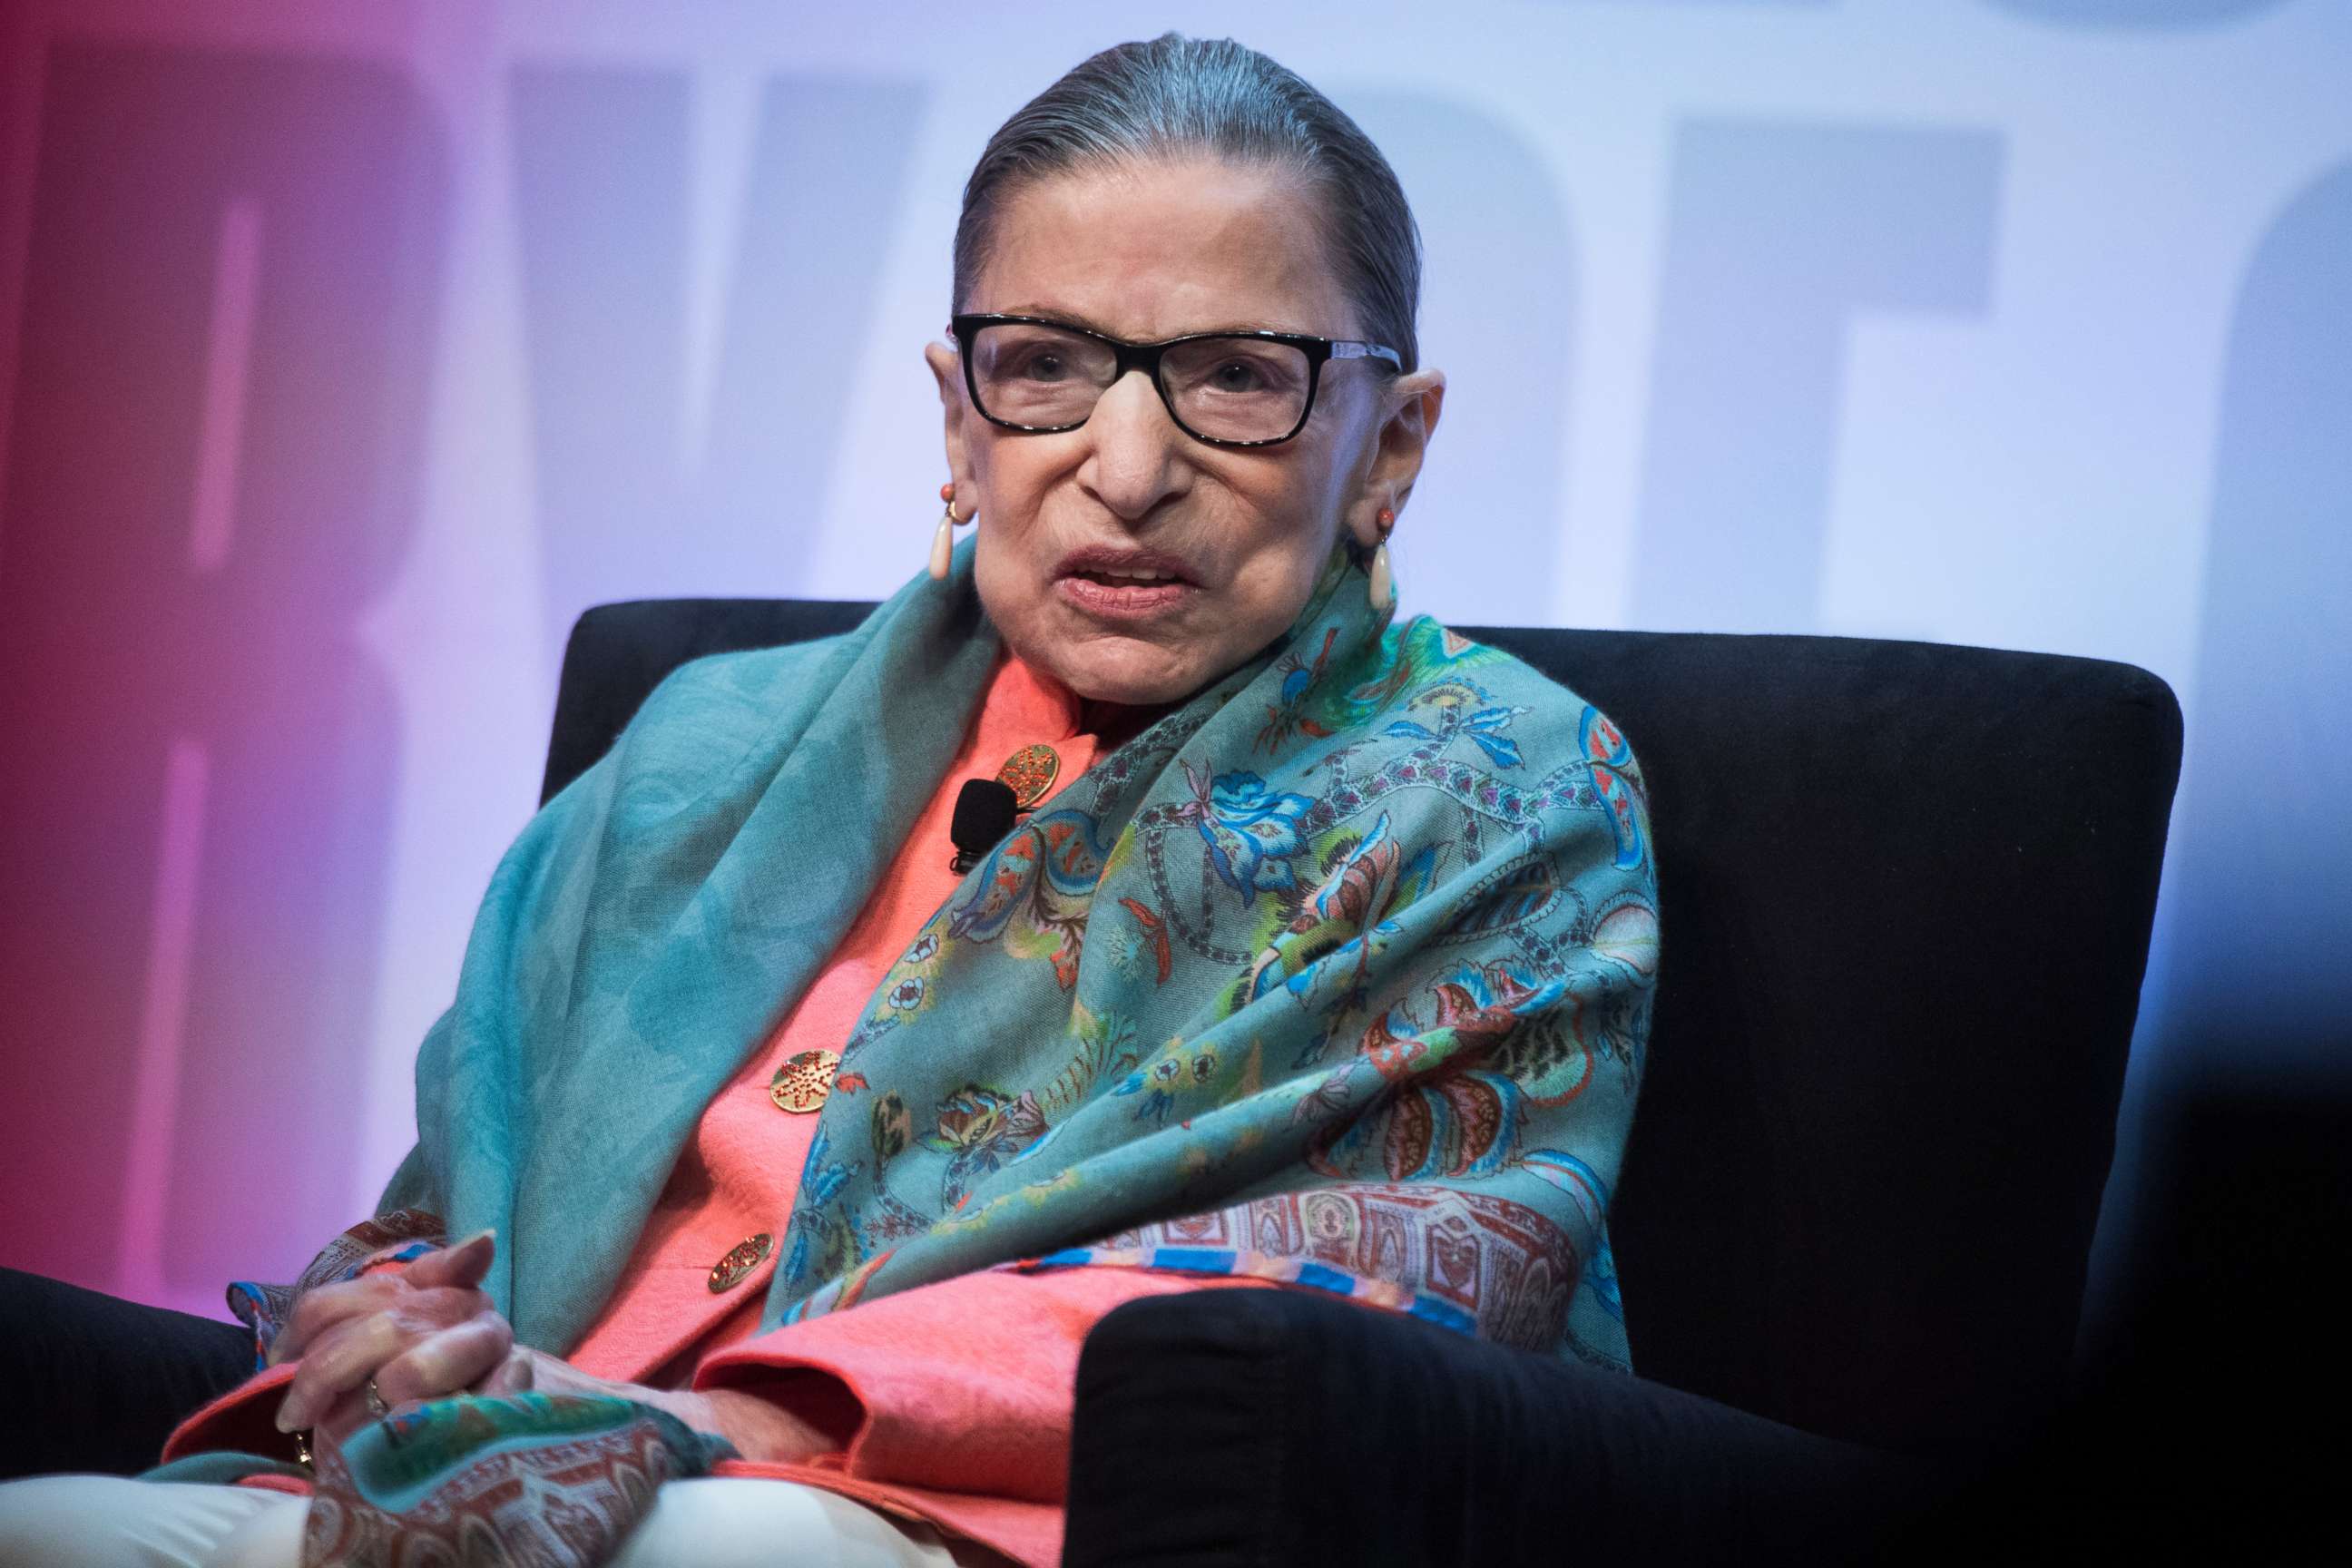 PHOTO: Supreme Court Justice Ruth Bader Ginsburg participates in a discussion during the Library of Congress National Book Festival at the Walter E. Washington Convention Center, Aug. 31, 2019.